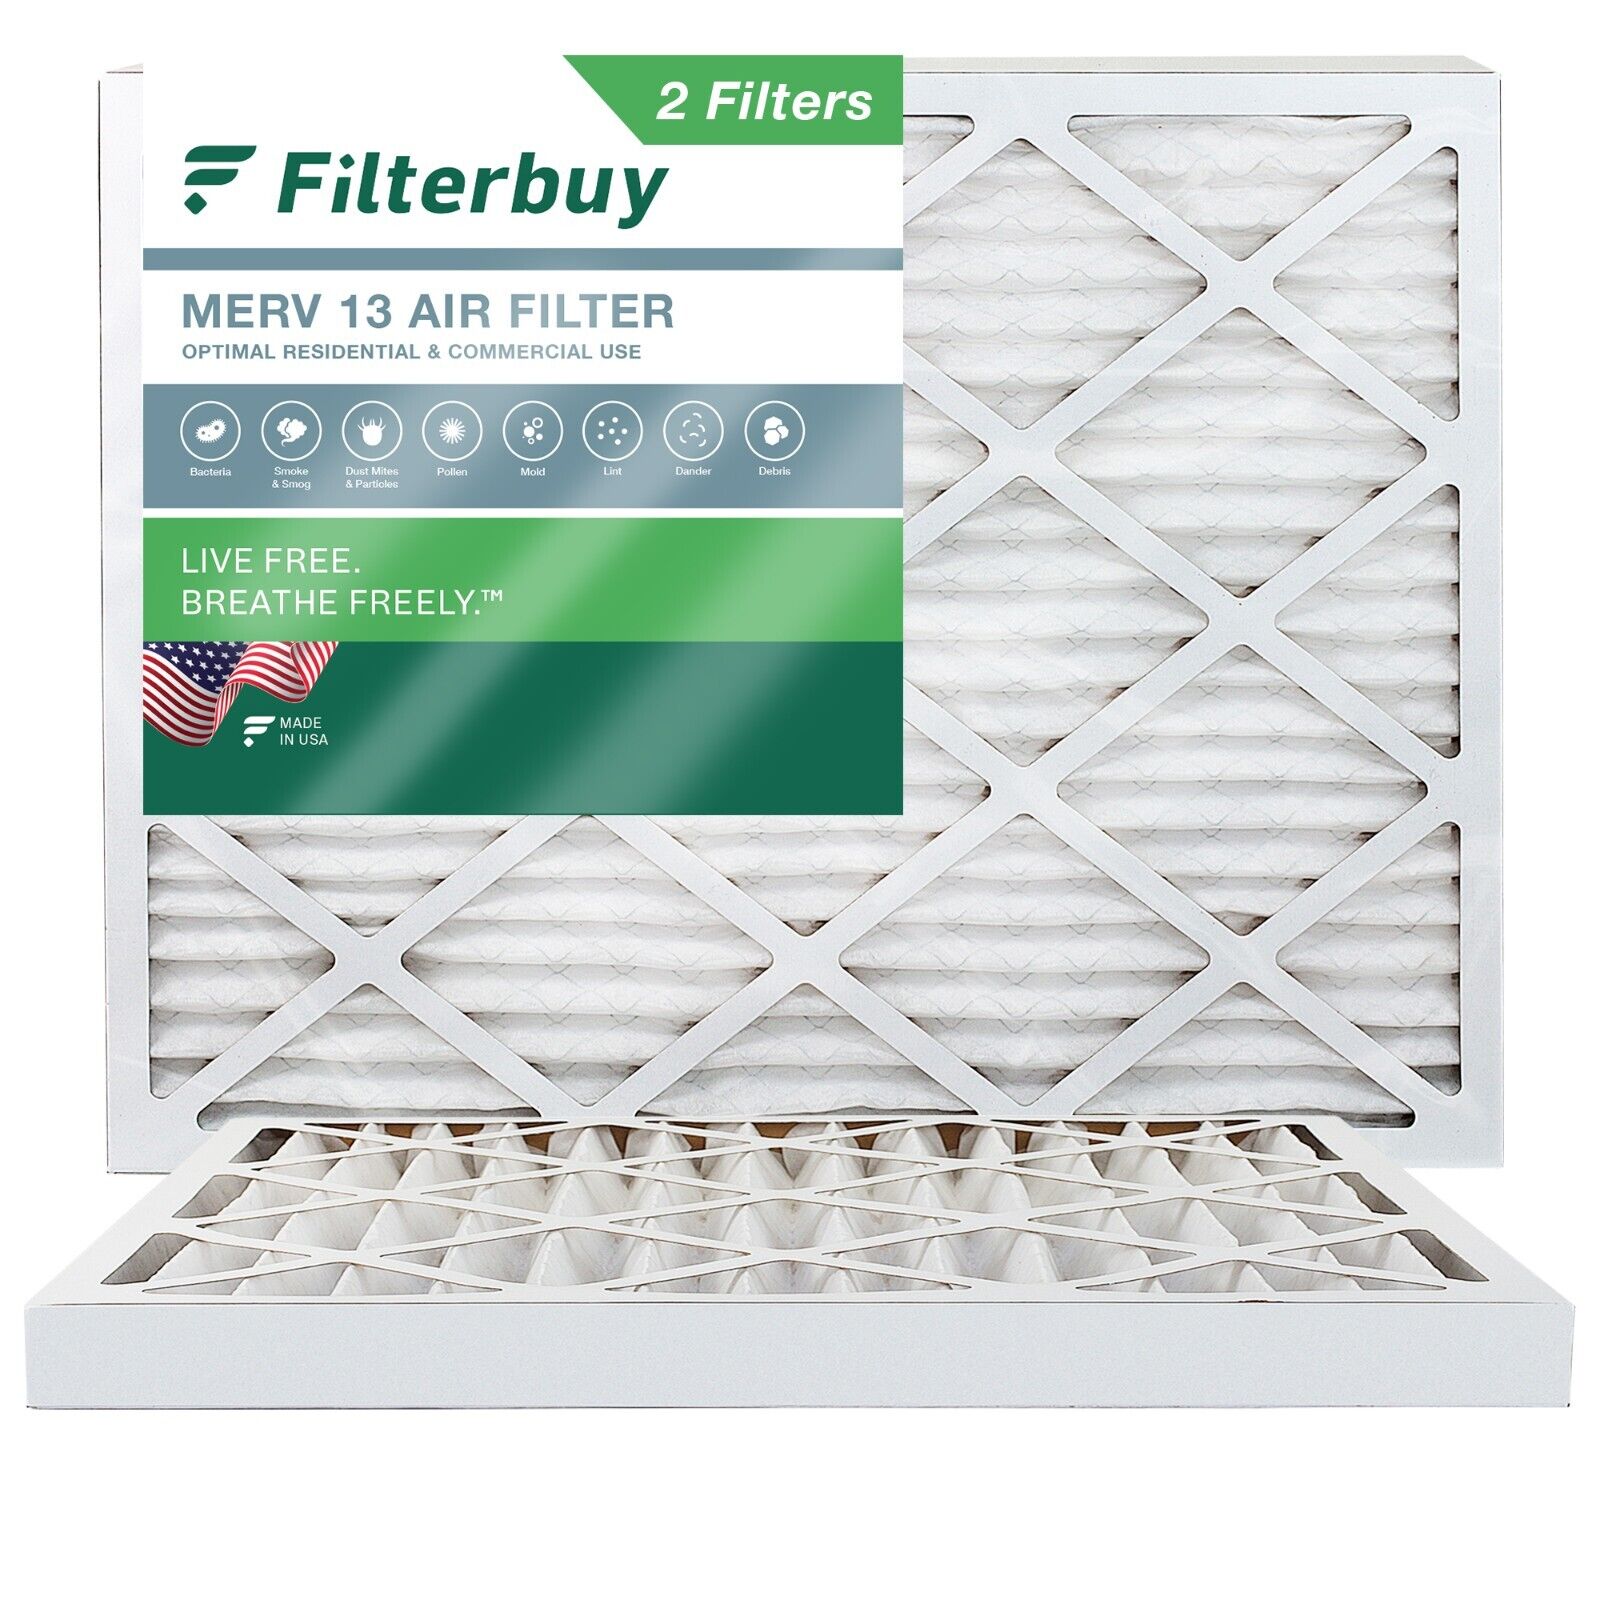 Filterbuy 20x25x2 Pleated Air Filters, Replacement for HVAC AC Furnace (MERV 13)